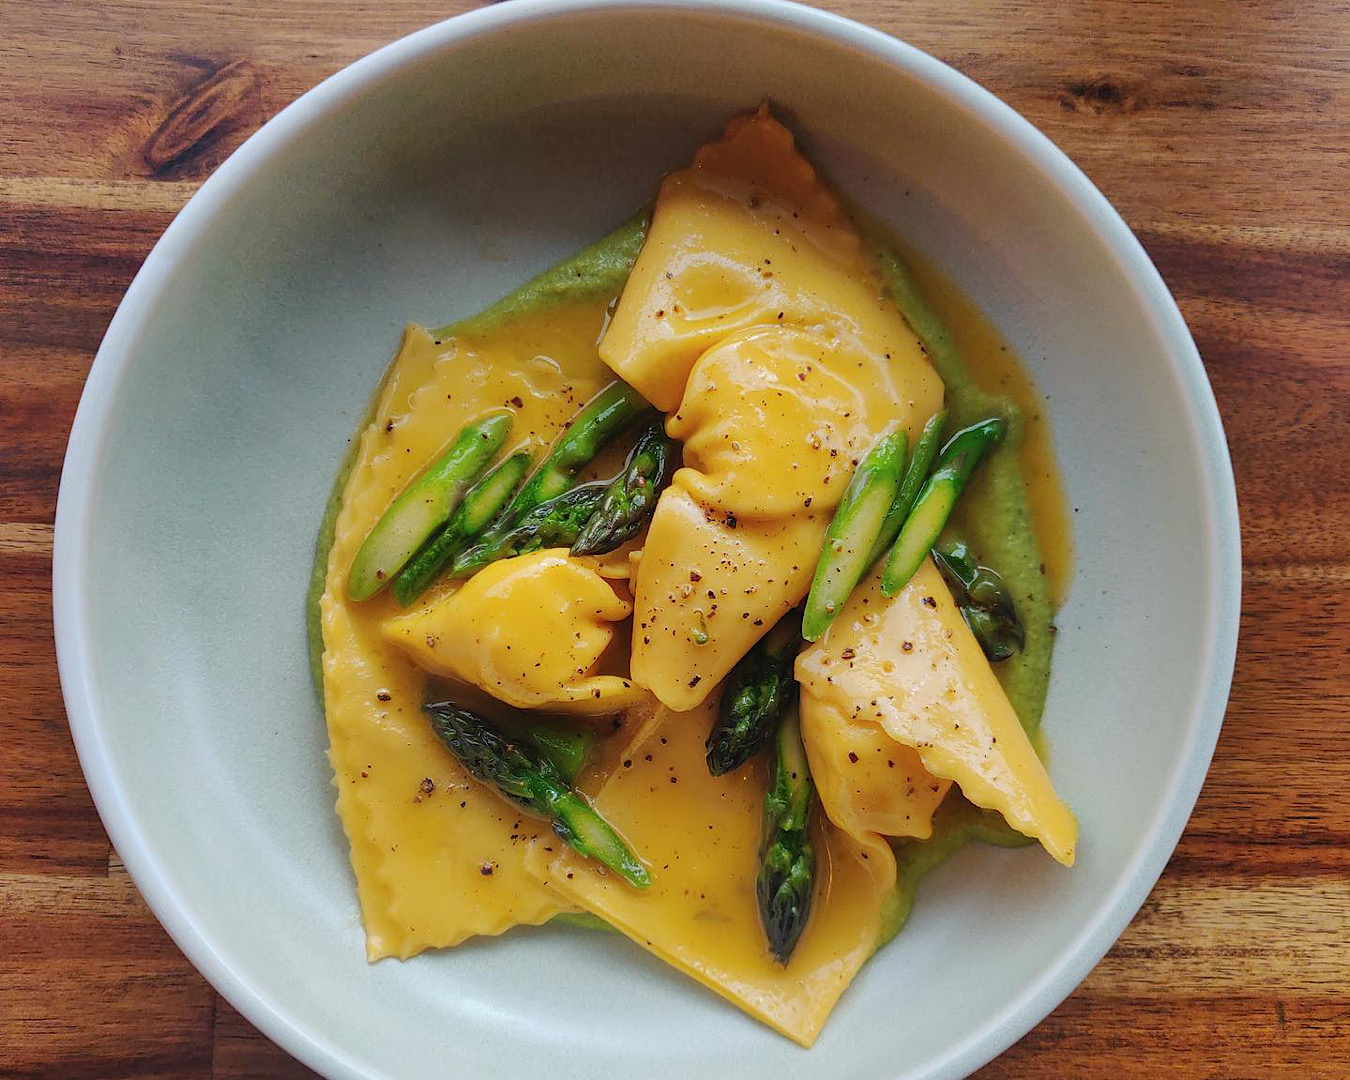 Vibrant yellow ravioli fresh from the kitchen at Cotto, one of the best restaurants on Karangahape Road.